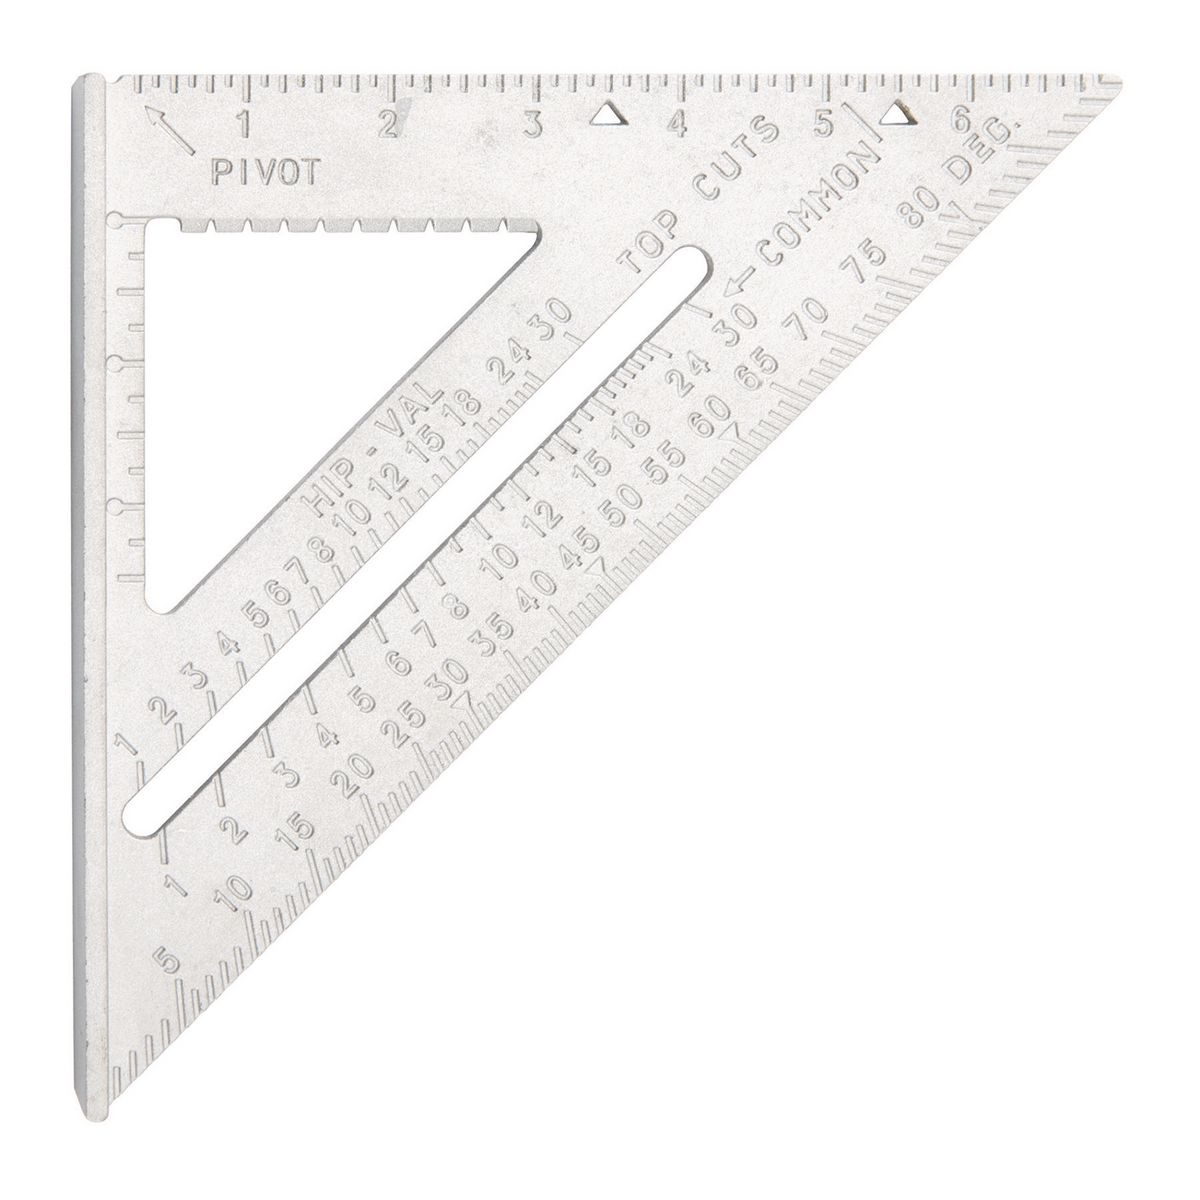 PITTSBURGH 4-in-1 Aluminum Rafter Angle Square - Item 63185 / 60798 / 61877 / 63140 / 07718